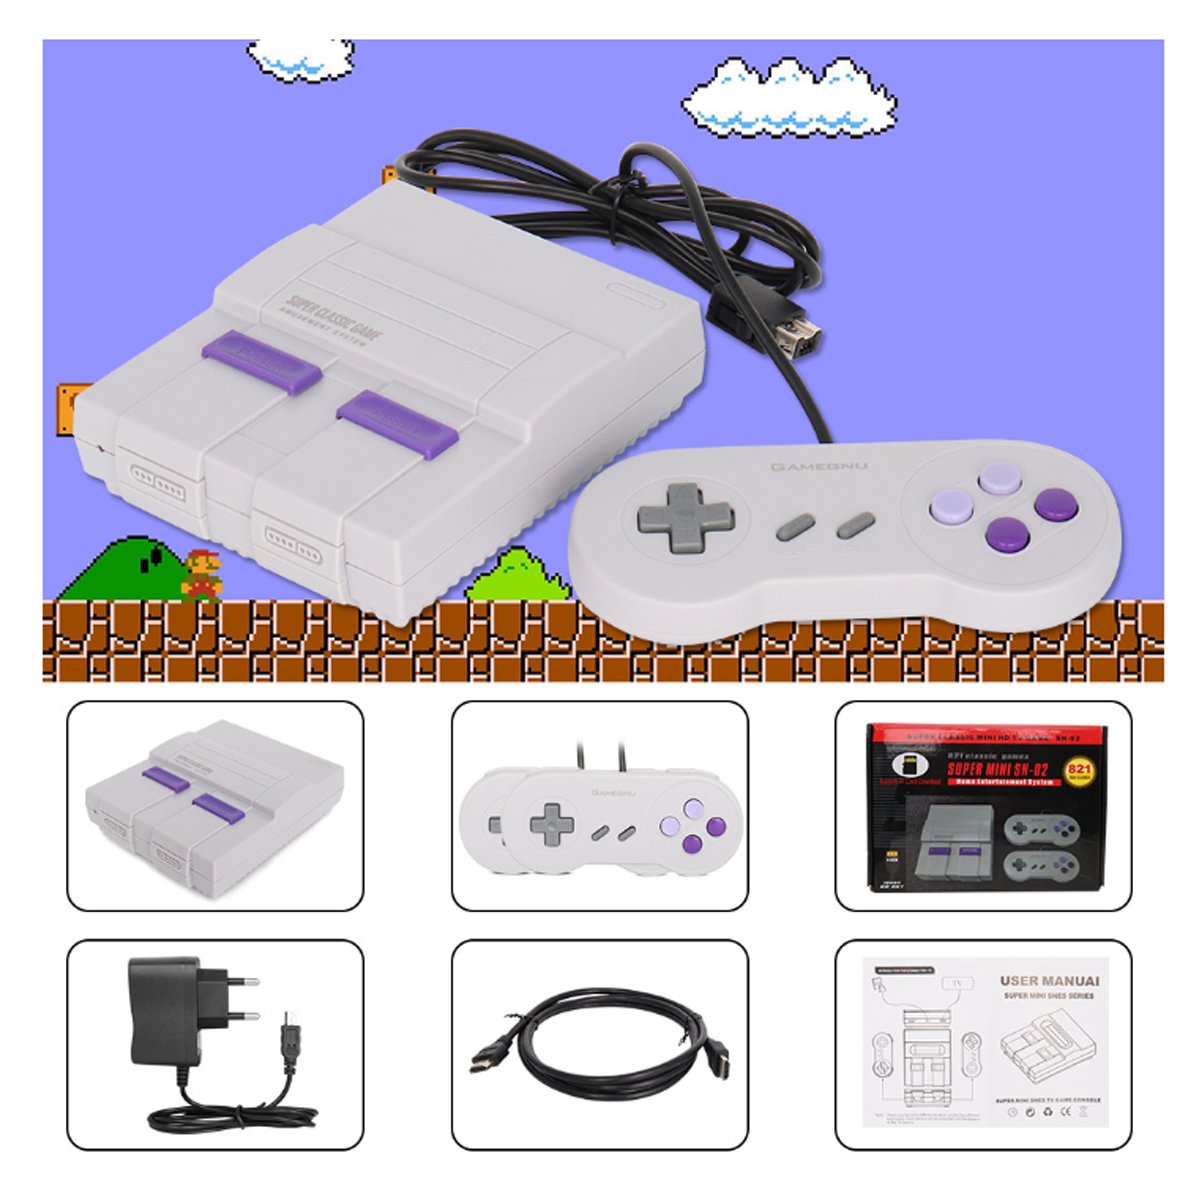 Retro Inspired Game Console With HDMI + 821 Games Loaded